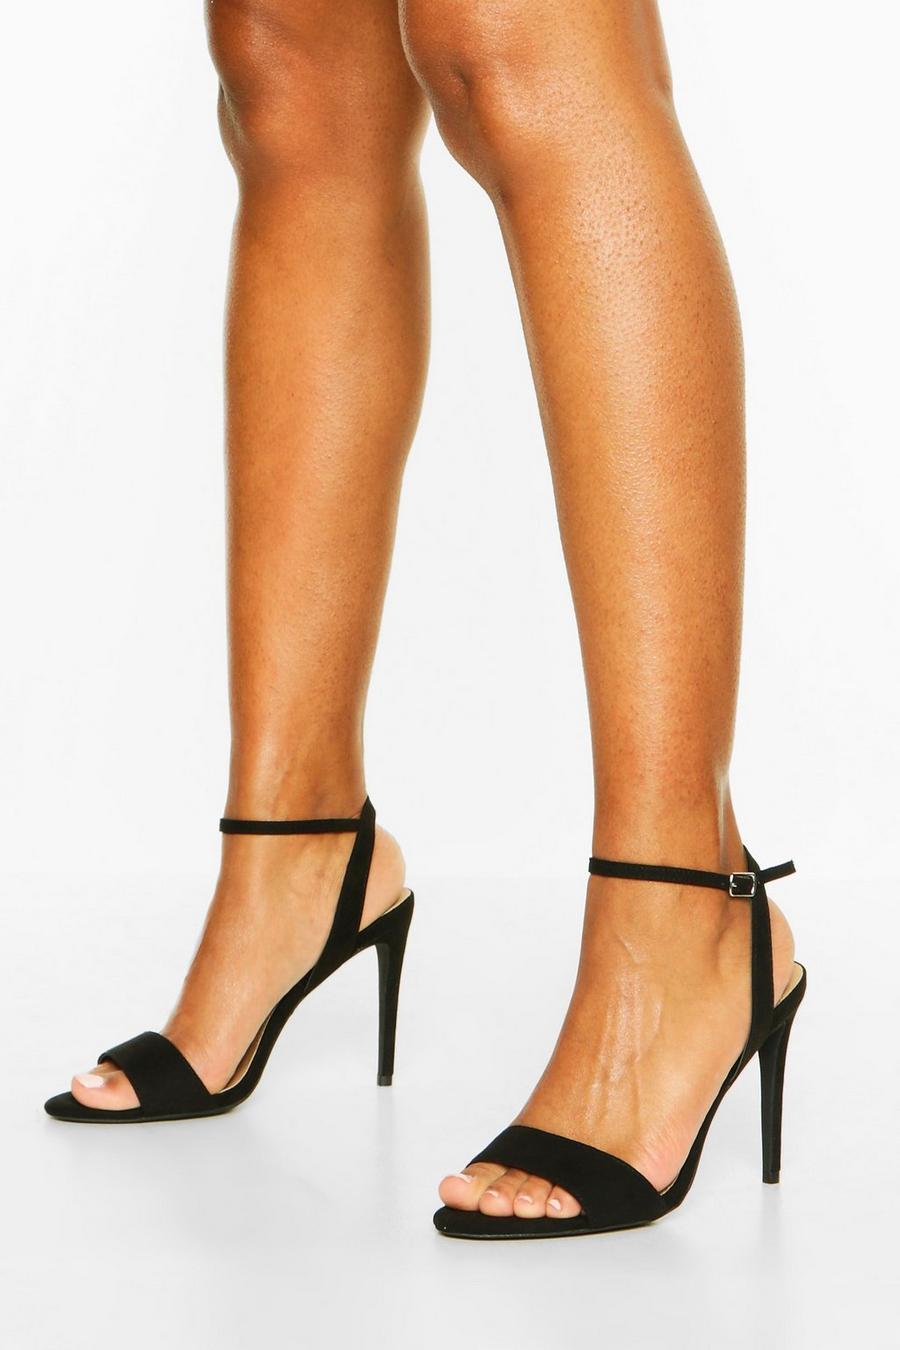 Black Strappy Barely There Stiletto Heels image number 1